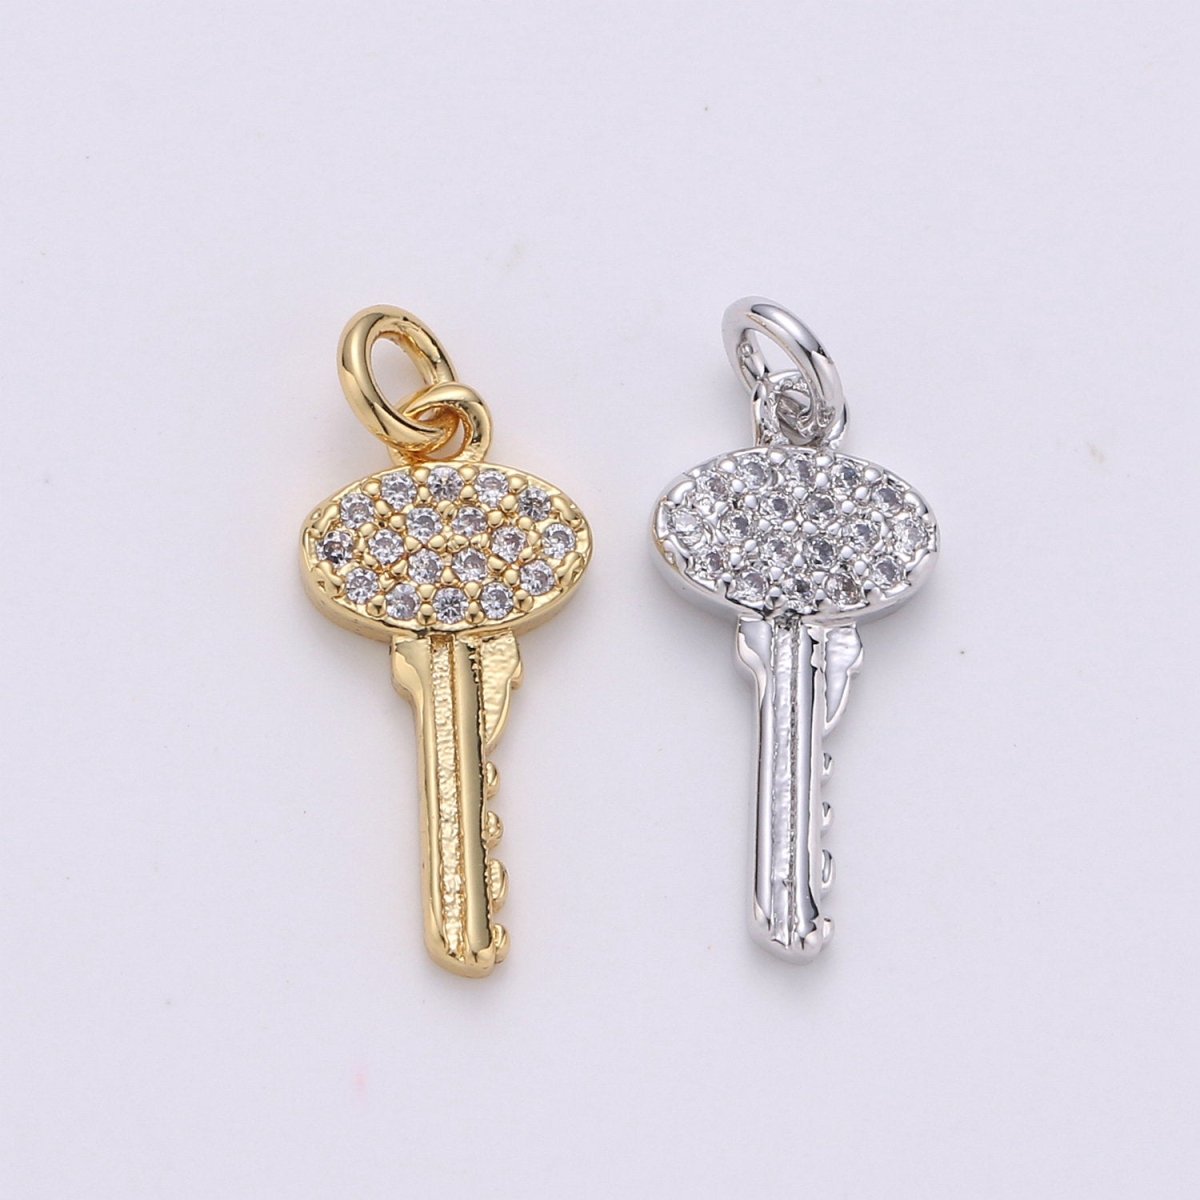 Gold Key Charm, Micro Pave CZ Charm, 14K Gold Filled Pendant Dainty Cubic Key Necklace Charm for Jewelry Making, D-046 - DLUXCA